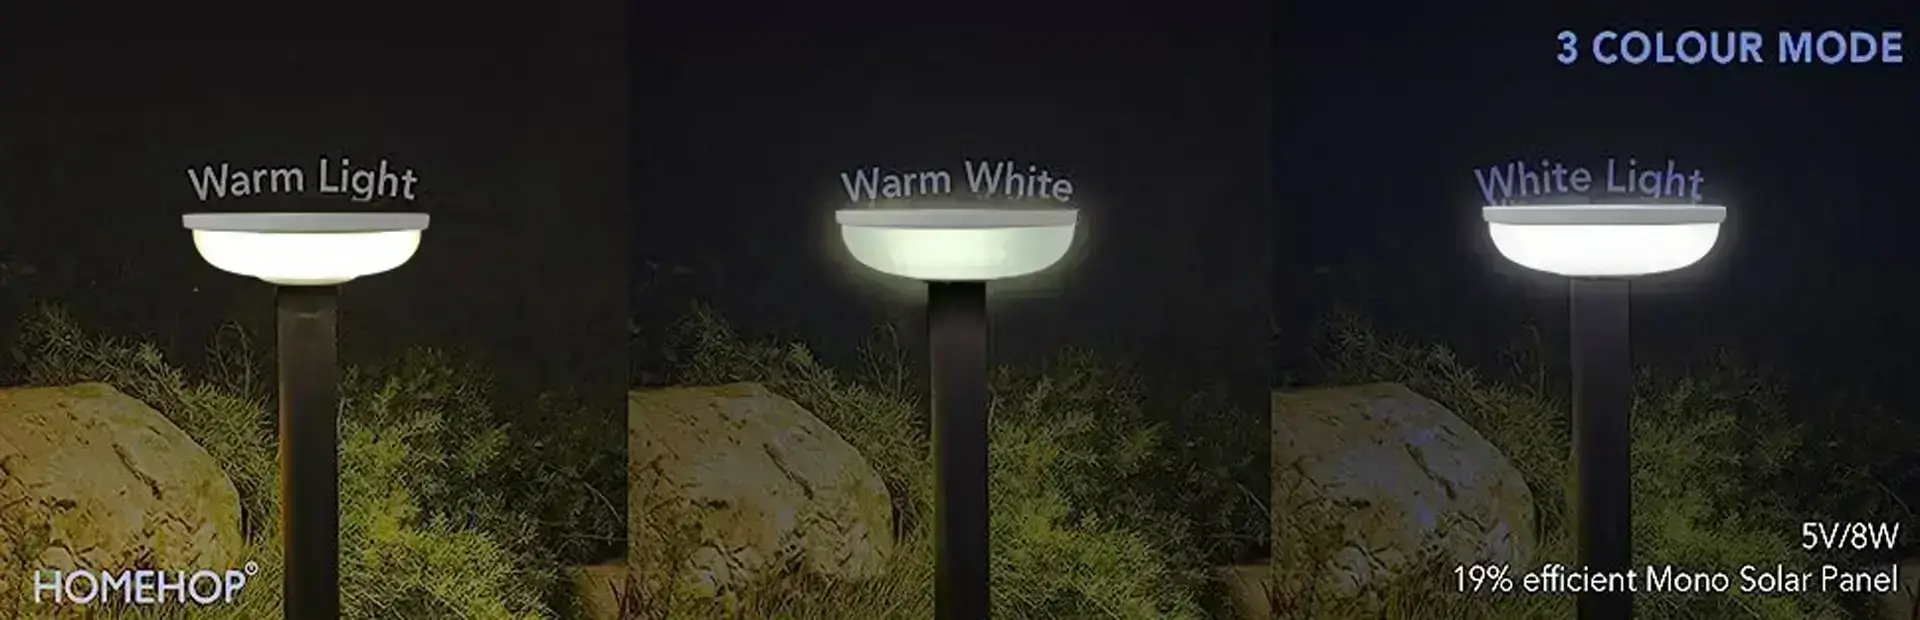 solar outdoor walkway lighting with three color modes